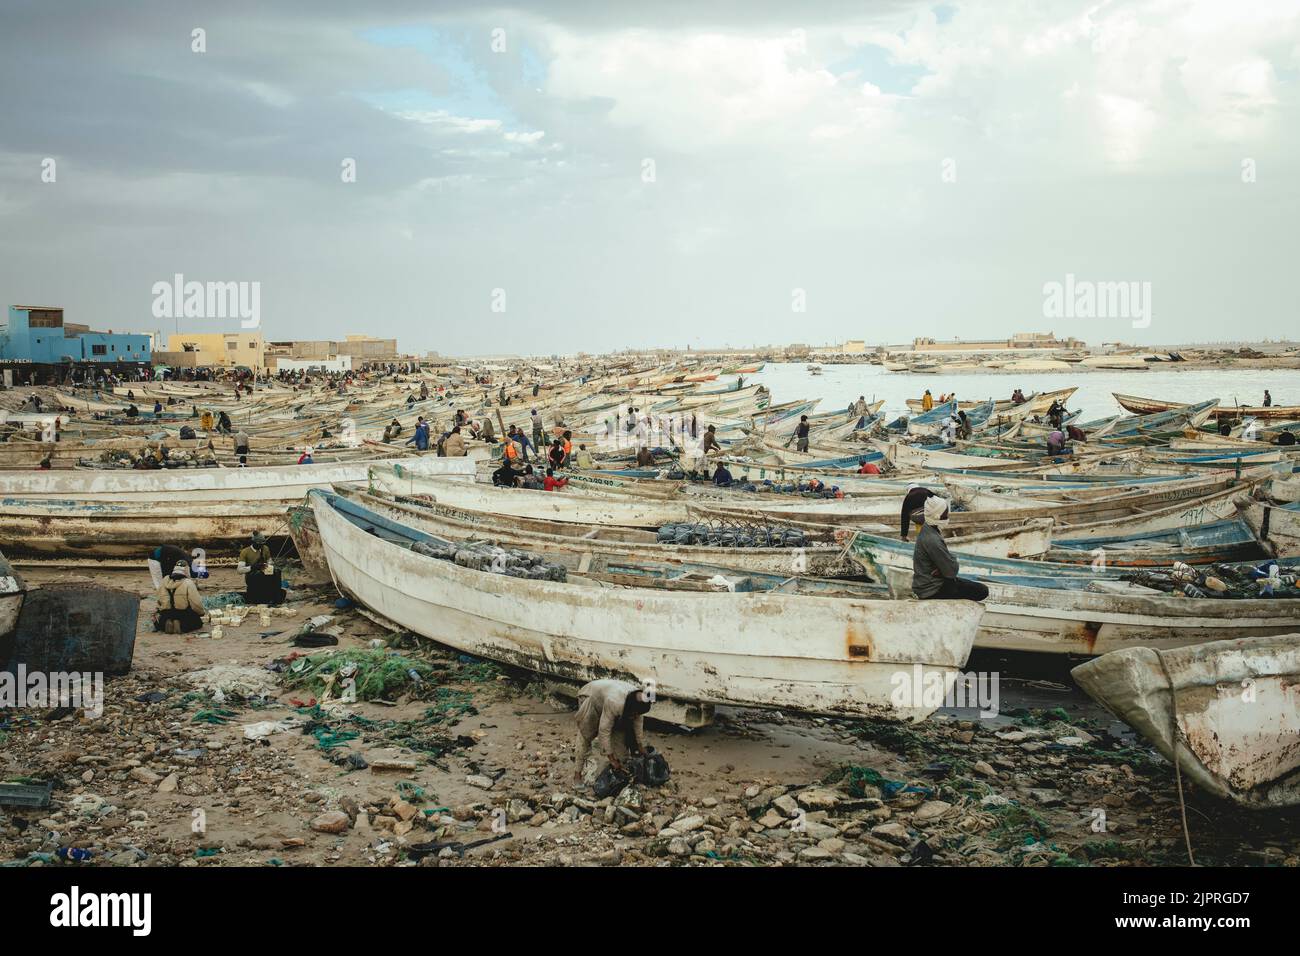 About 7000 fishing boats moored in the harbour, Port de Peche Traditionelle, Nouadhibou, Mauritania Stock Photo